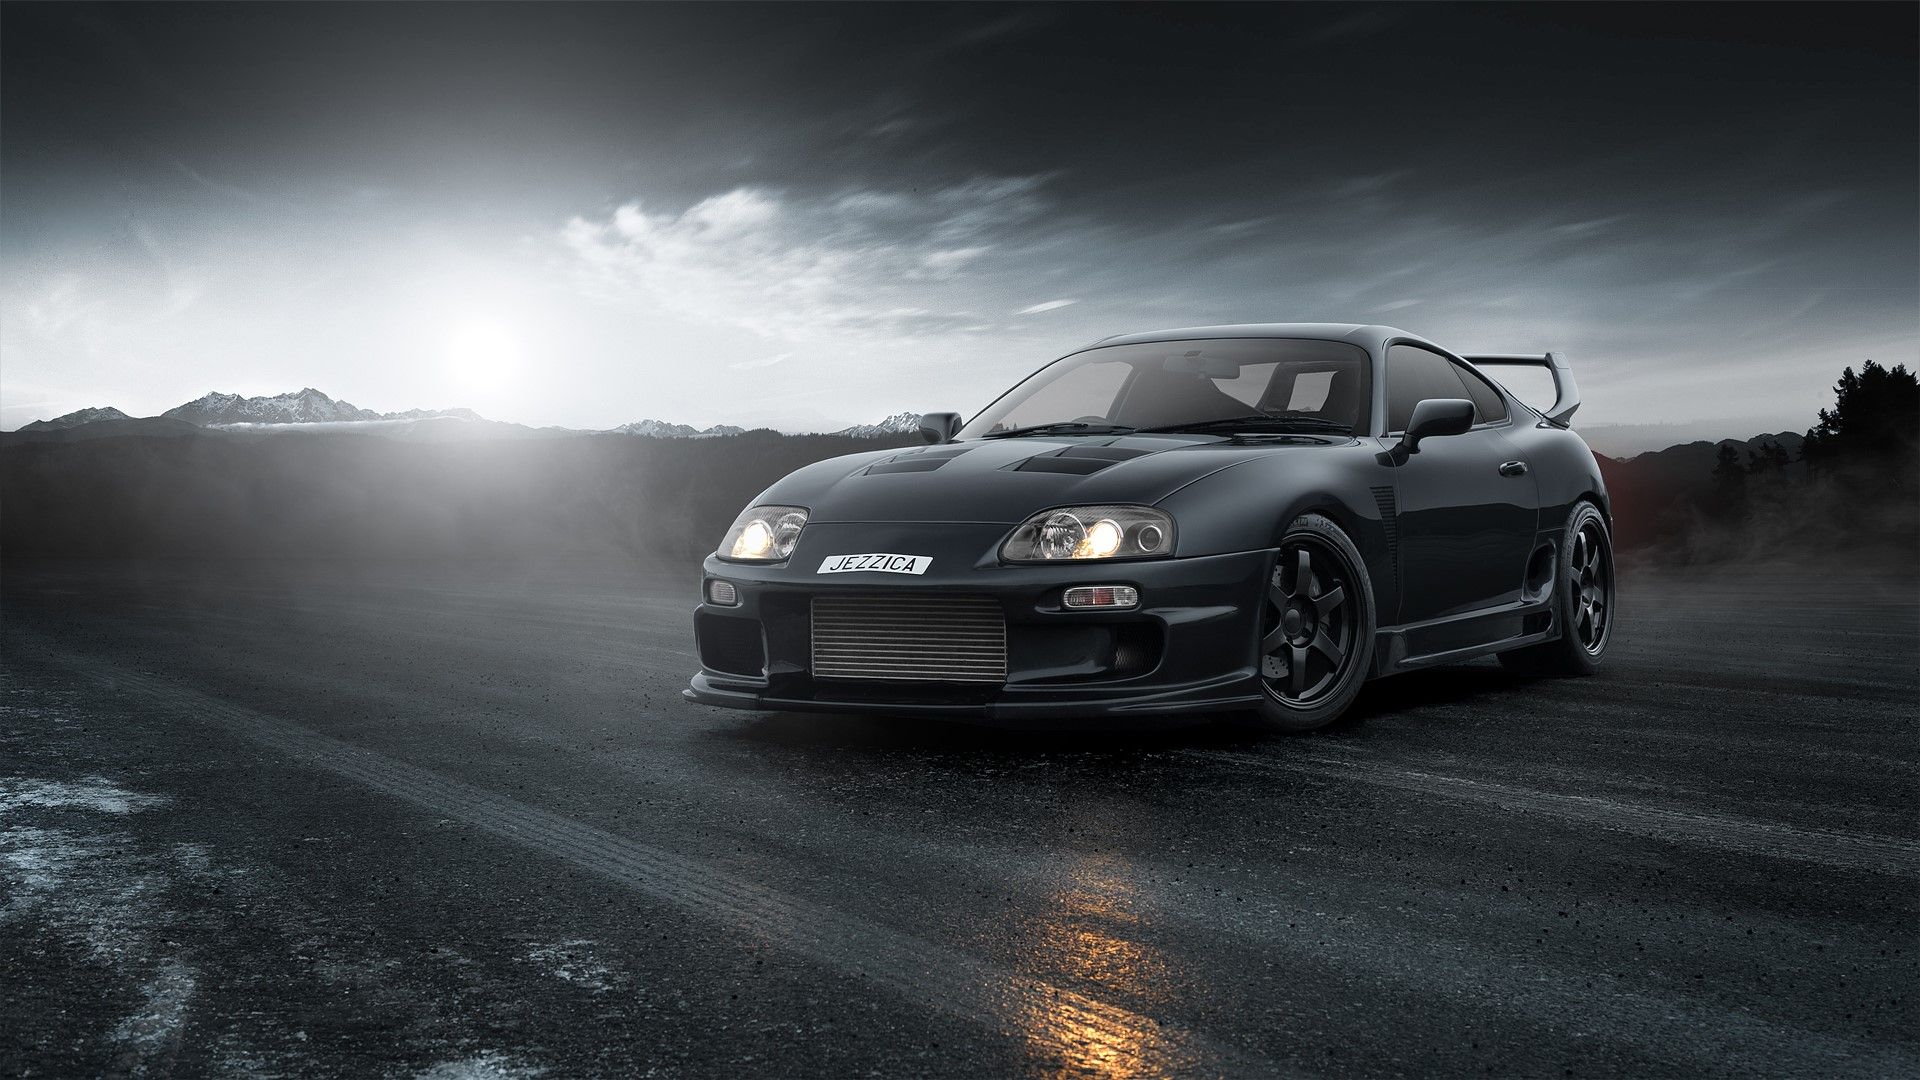 Wallpaper / Toyota, Toyota Supra, Japanese, Japanese cars, race cars, 90s, Retro car, Fast and Furious, black, black cars, car, vehicle free download